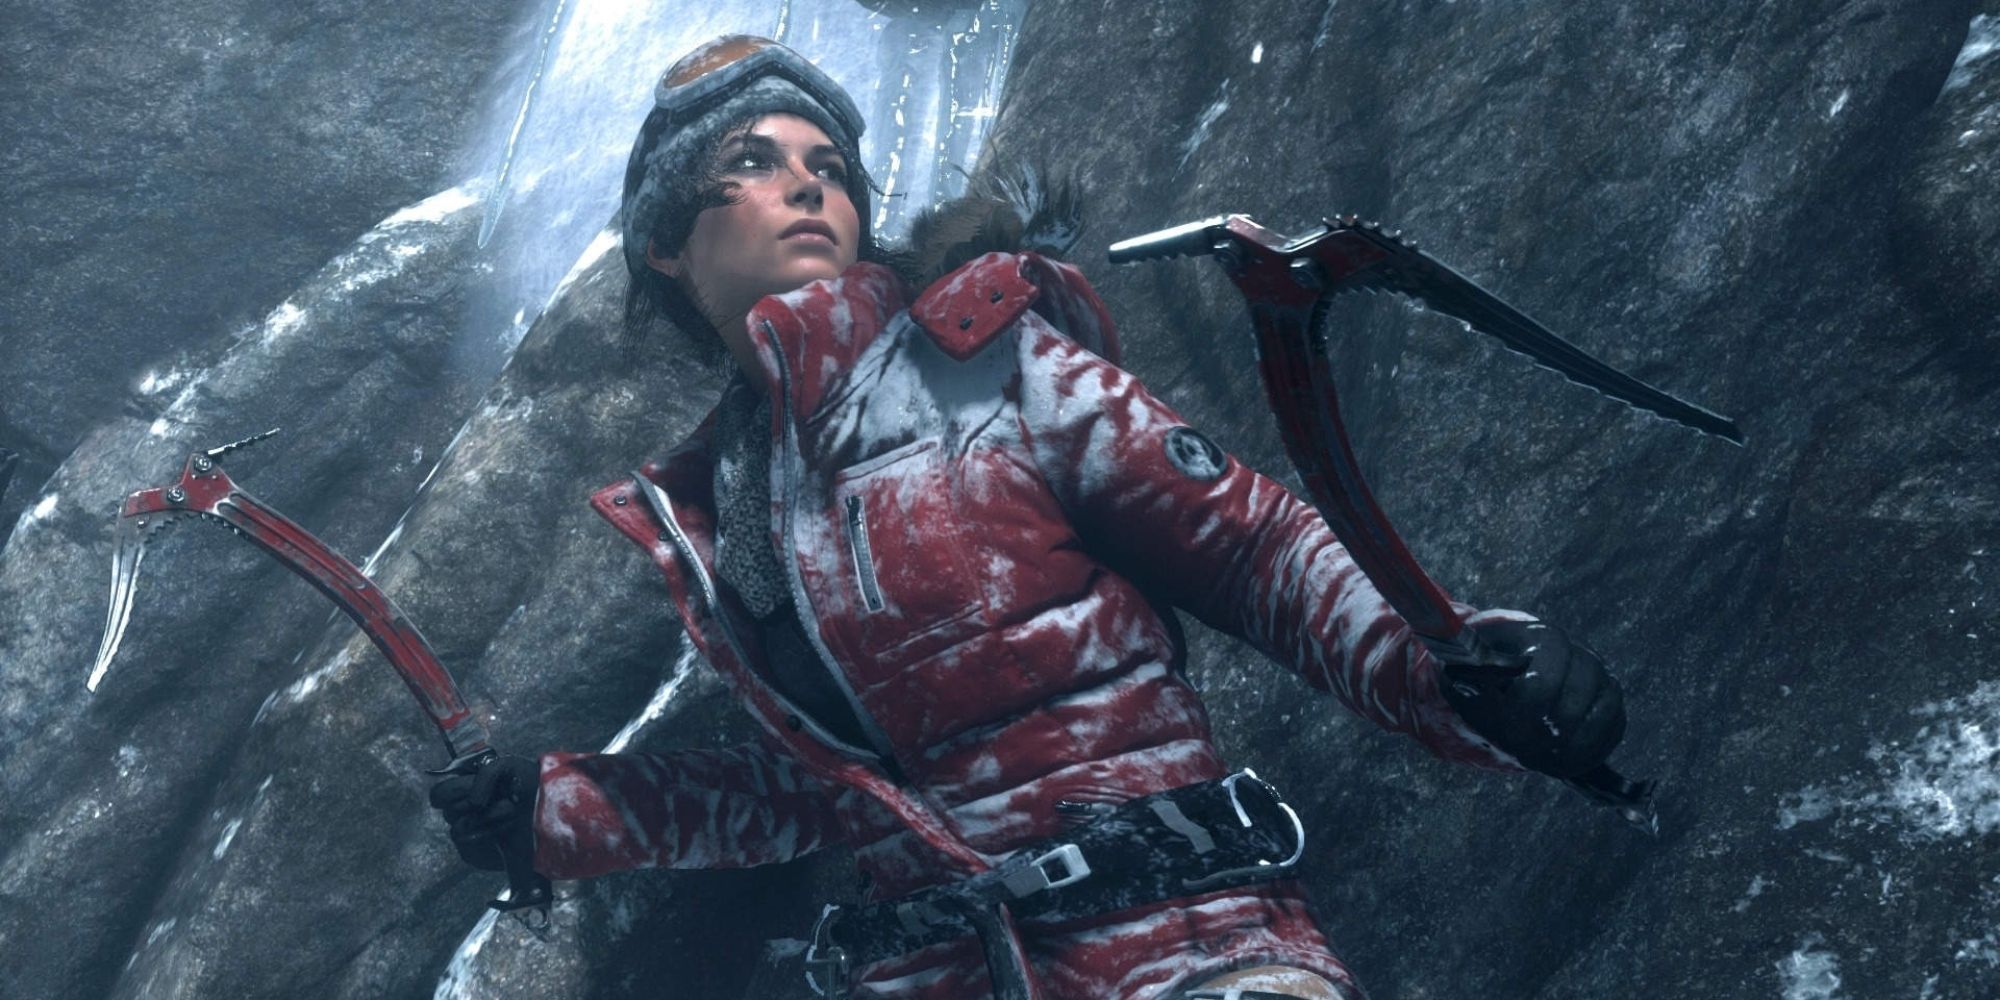 Rise Of The Tomb Raider Screenshot Of Lara Croft With Axes On Mountain